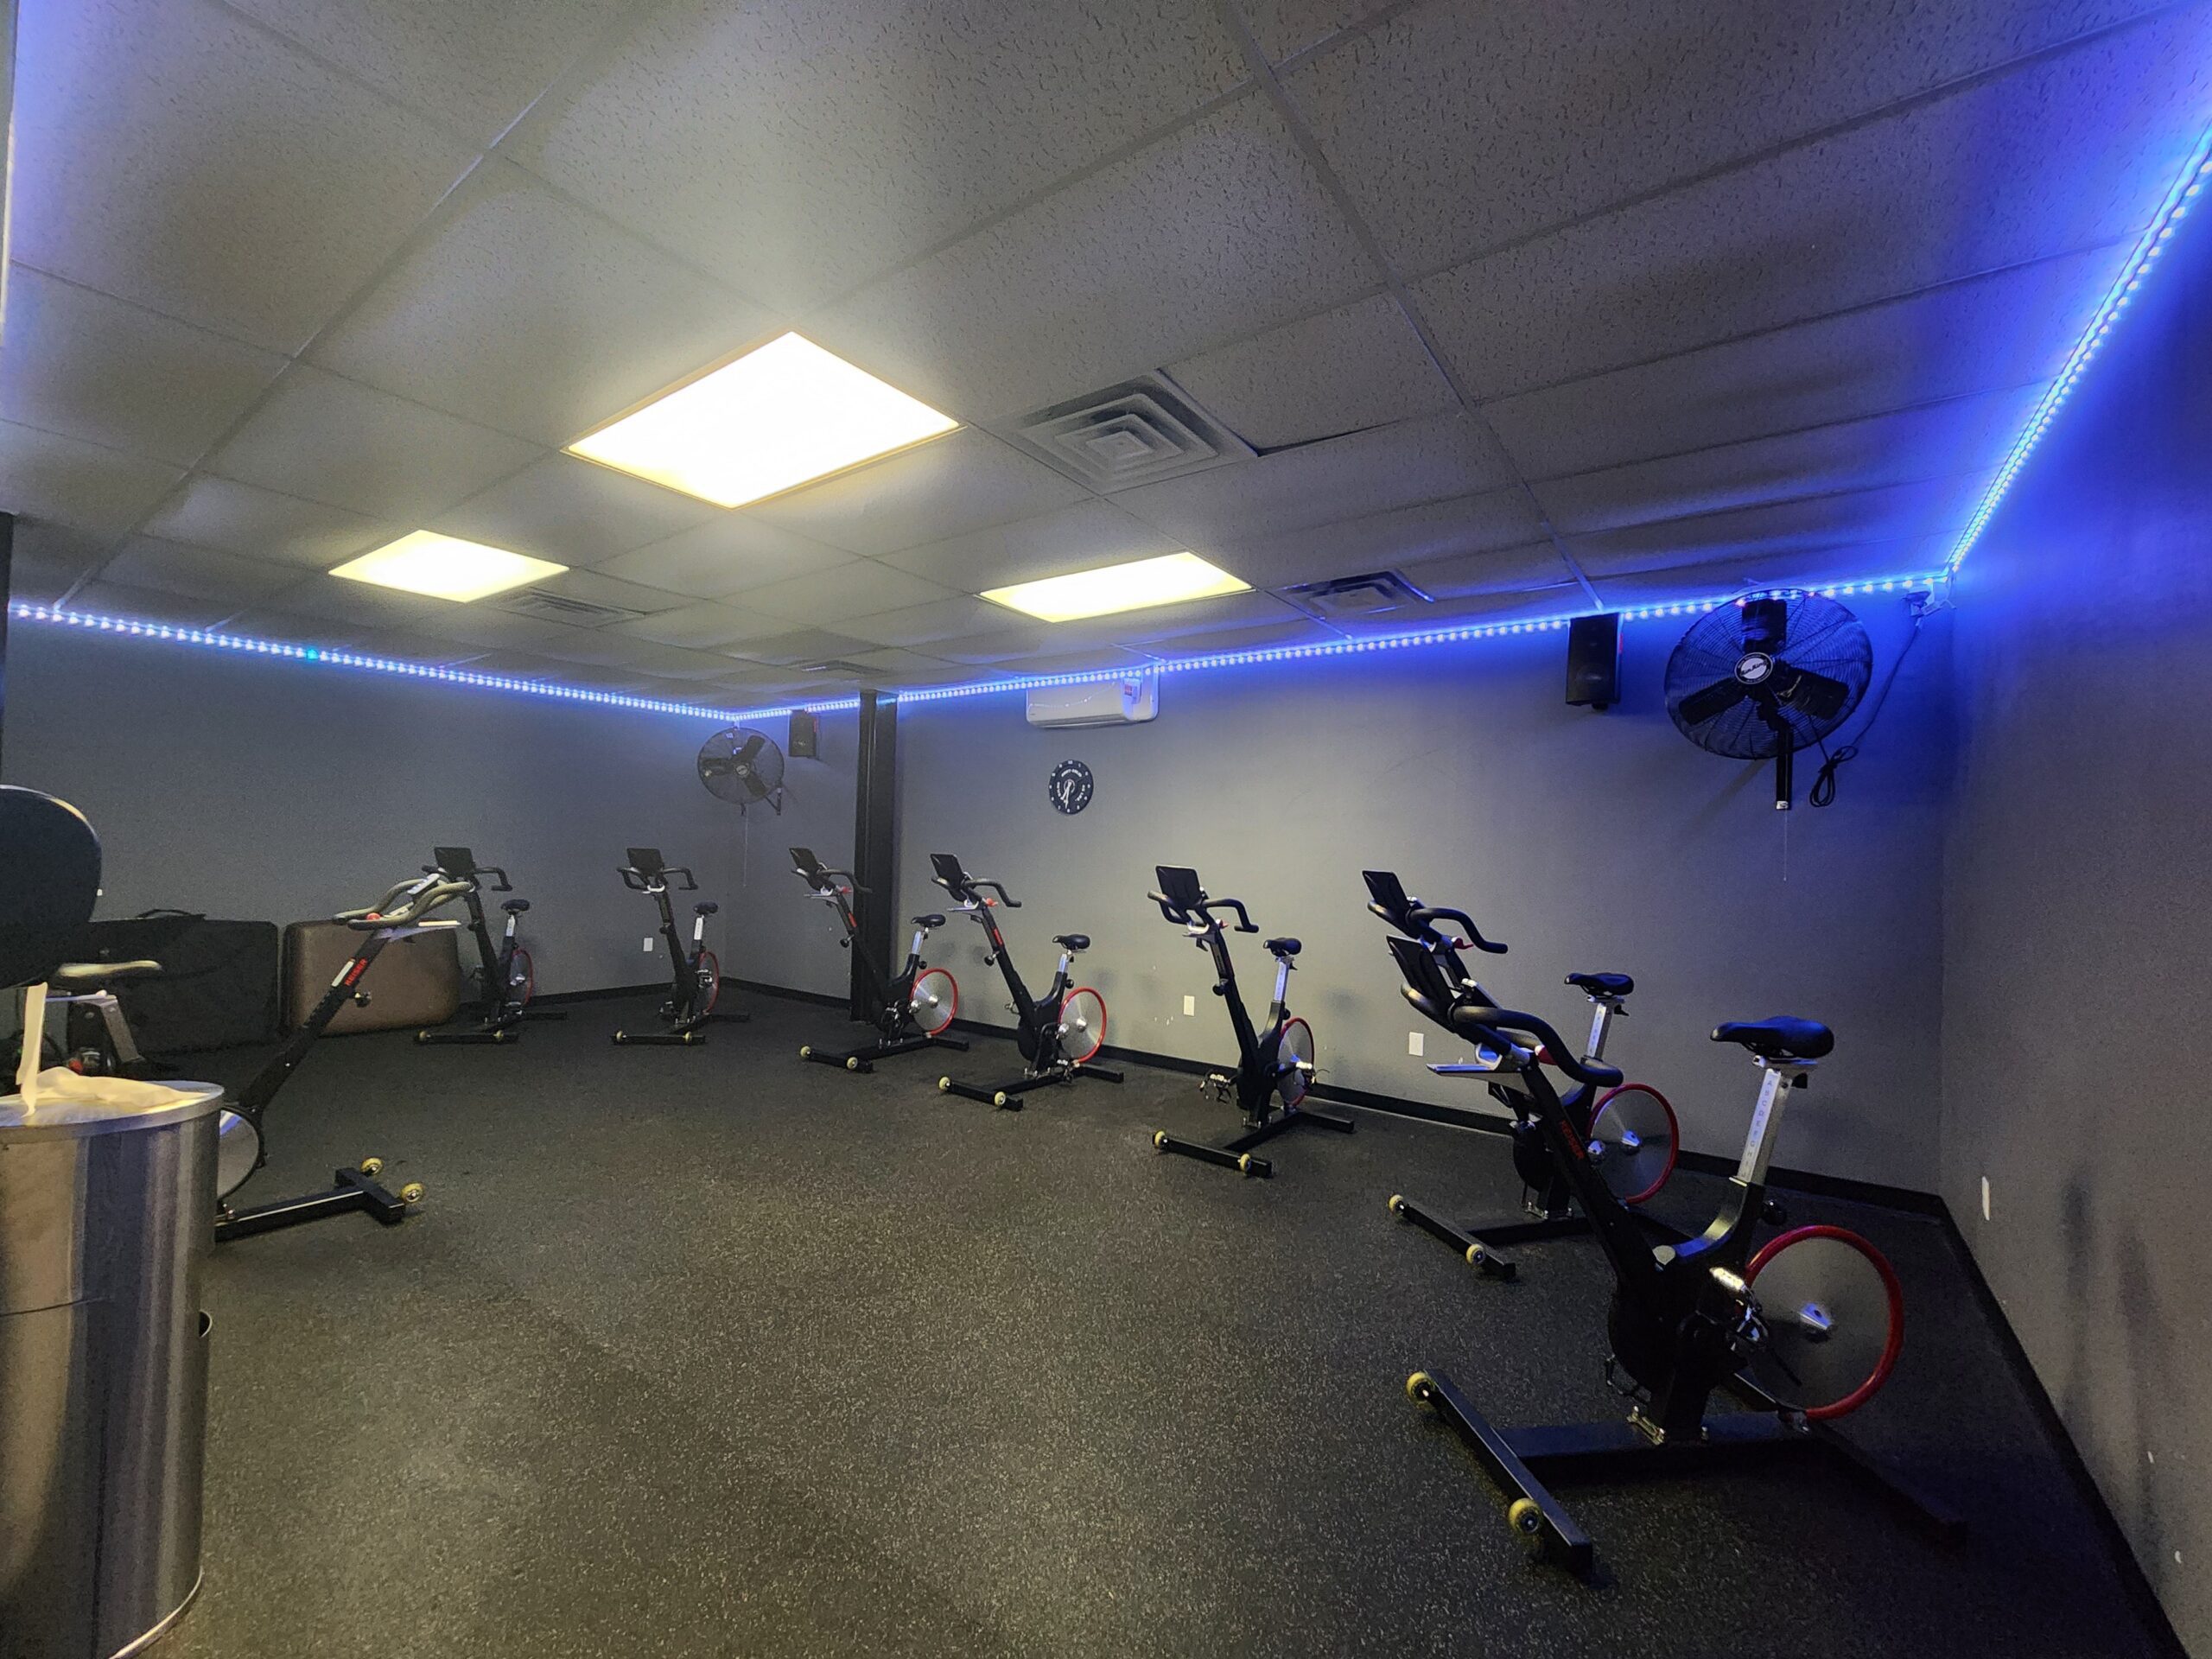 spin classes at next fit clubs in hillsborough nj 08844